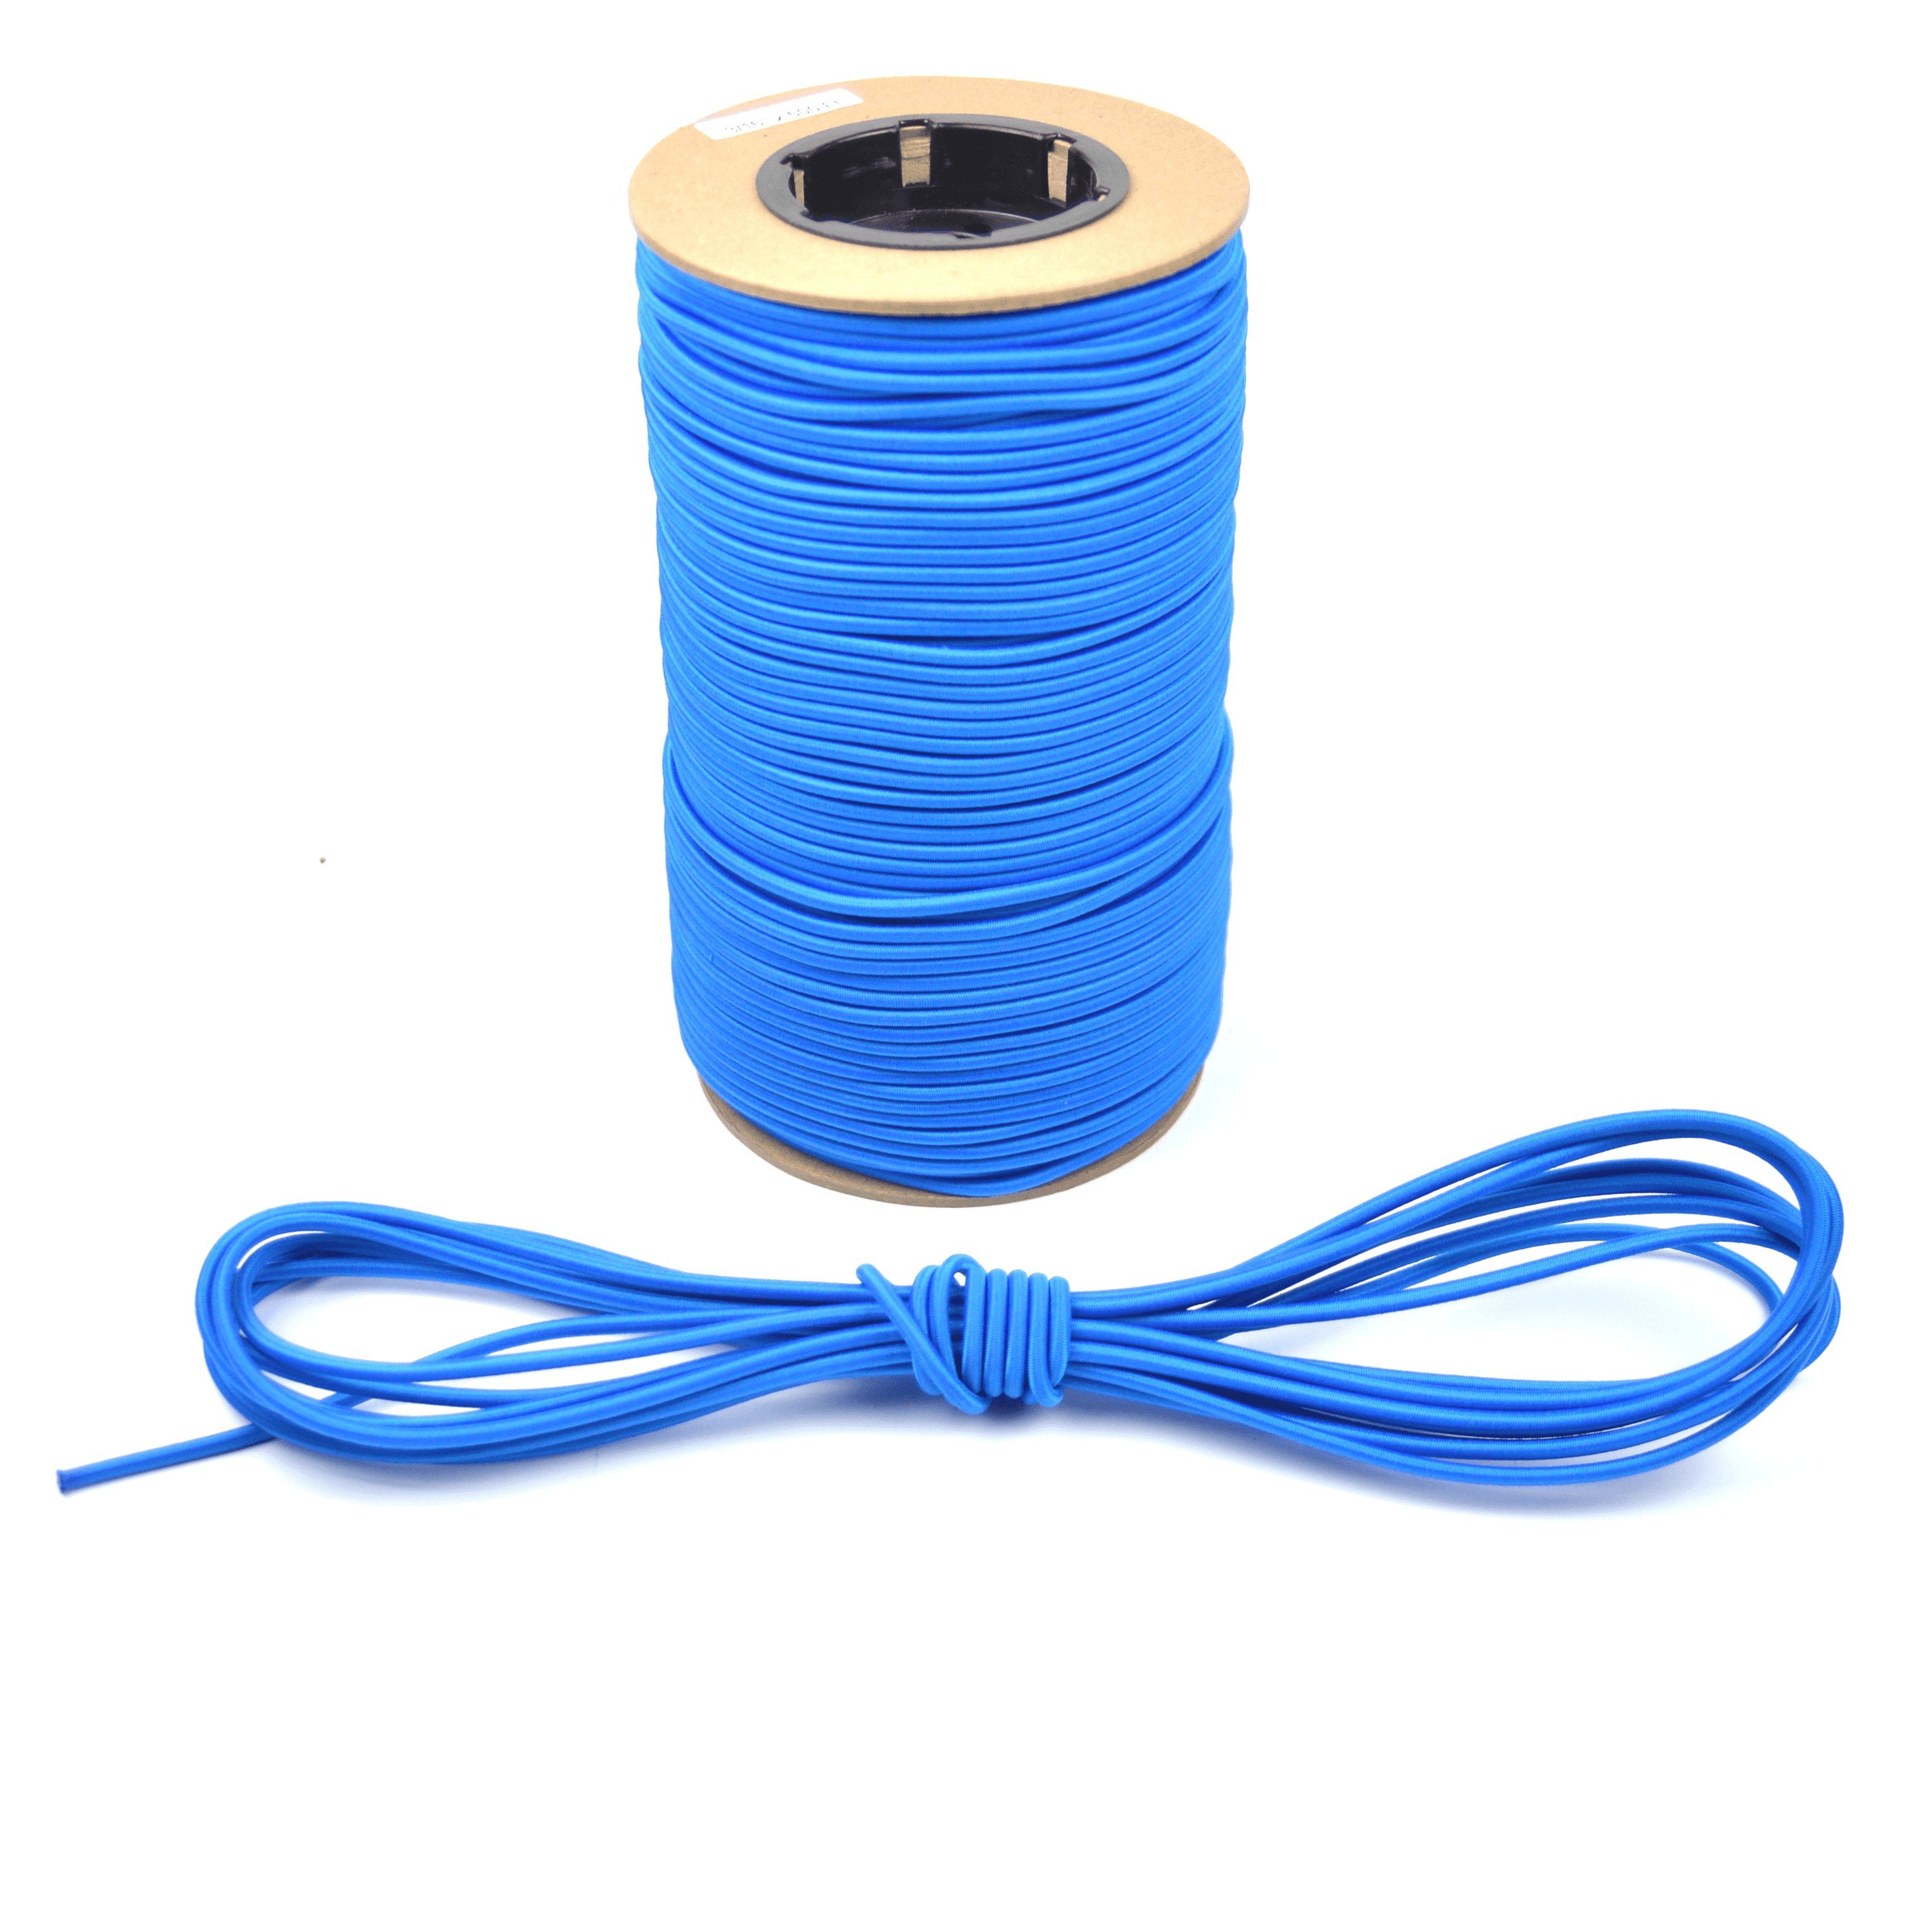 50ft 1/4" Yellow Bungee Cord Marine Grade Heavy Duty Shock Rope Tie Down Stretch 